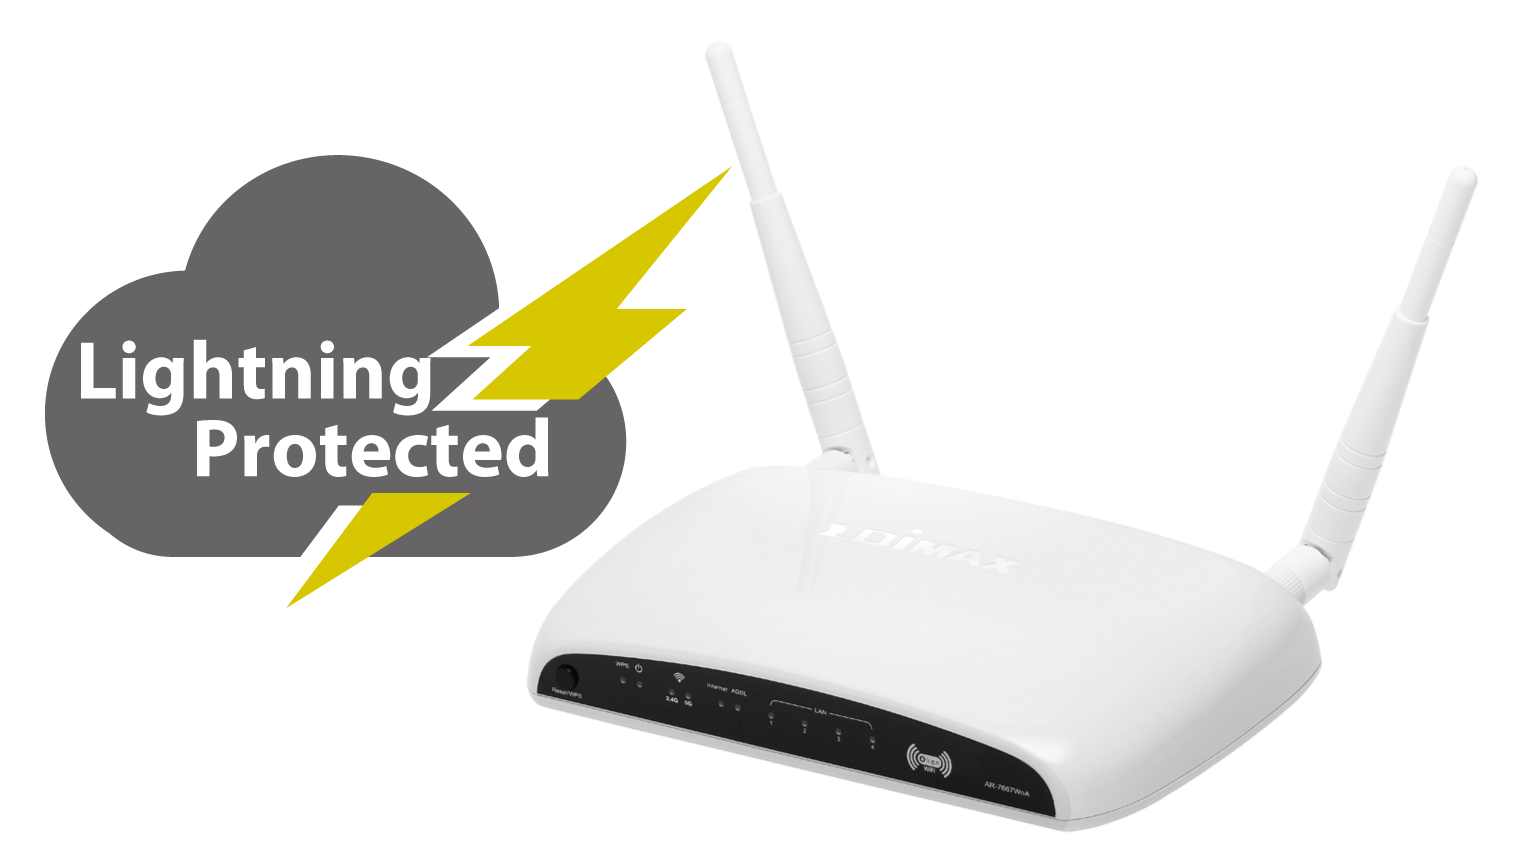 Edimax AR-7667WnA N600 Wireless Dual-Band Gigabit ADSL2/2+ Modem Router lightning_protected.png